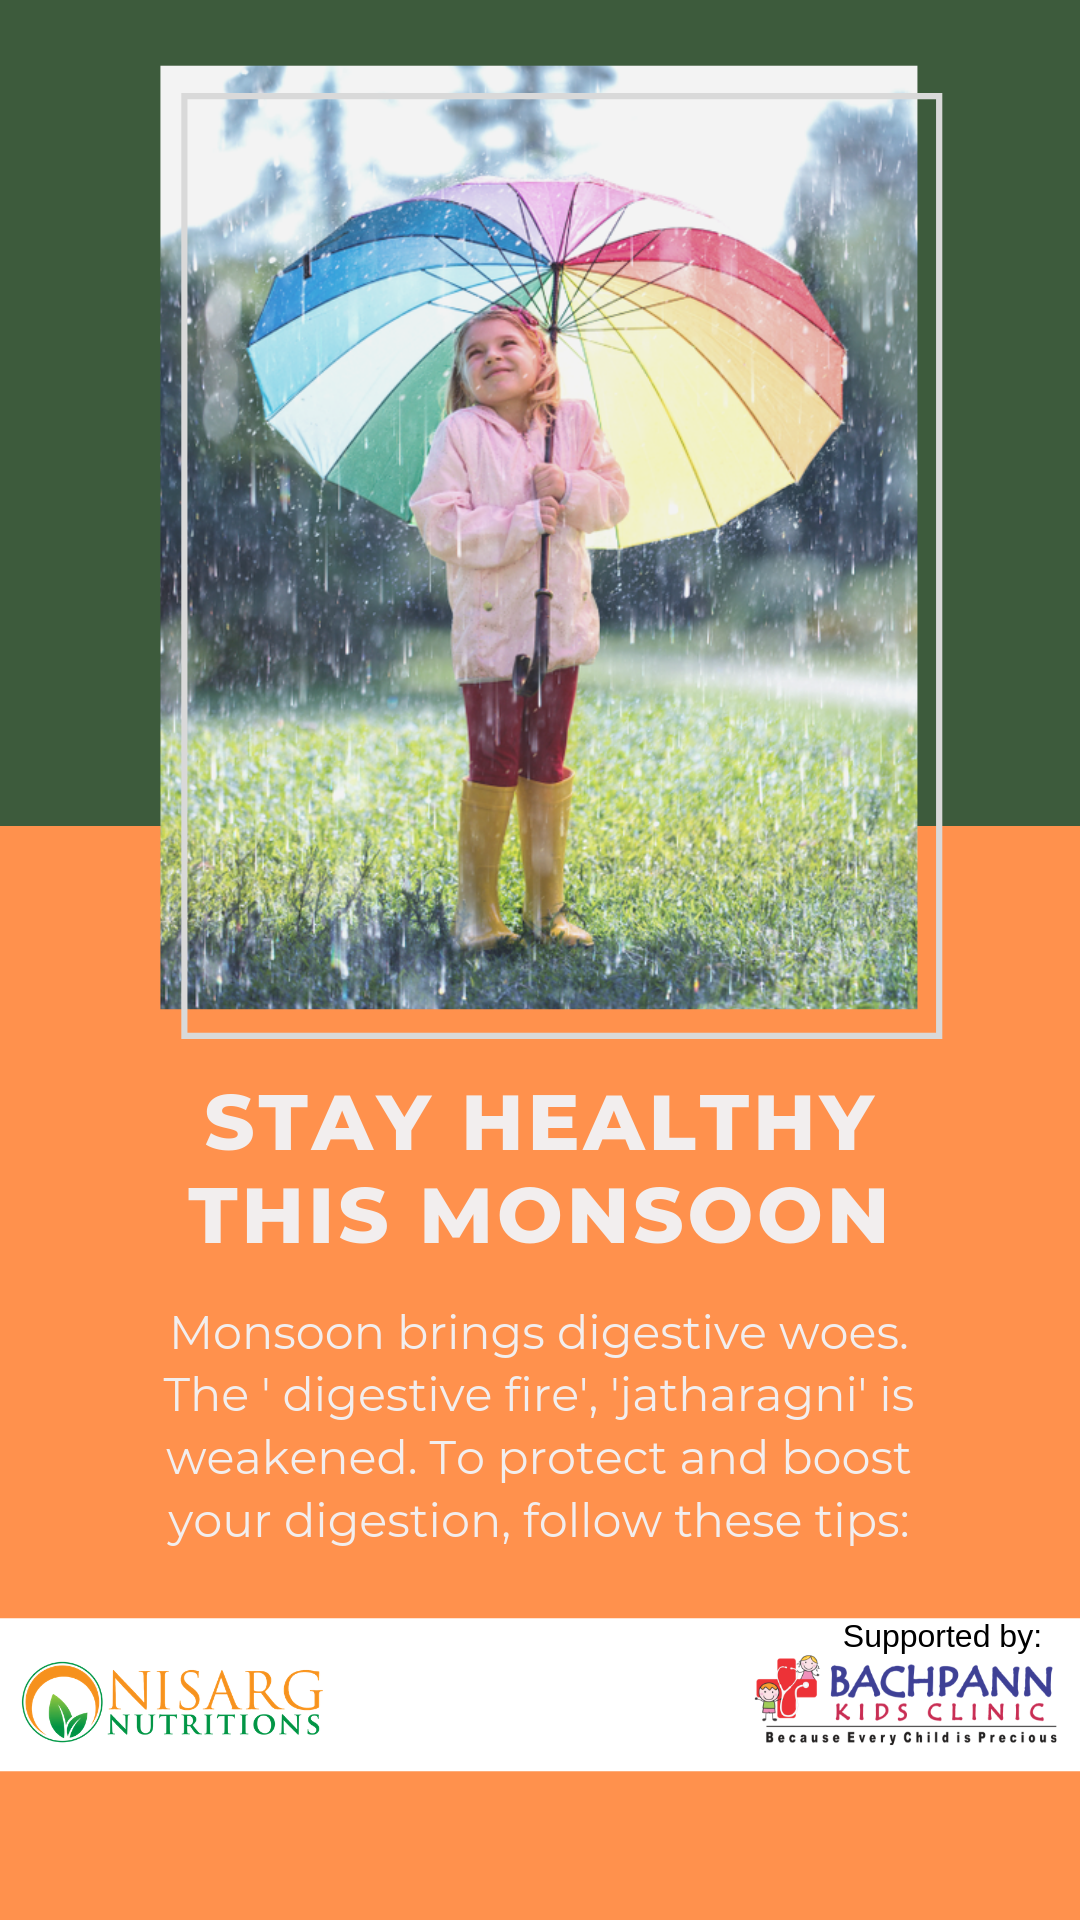 Stay Healthy this Monsoon